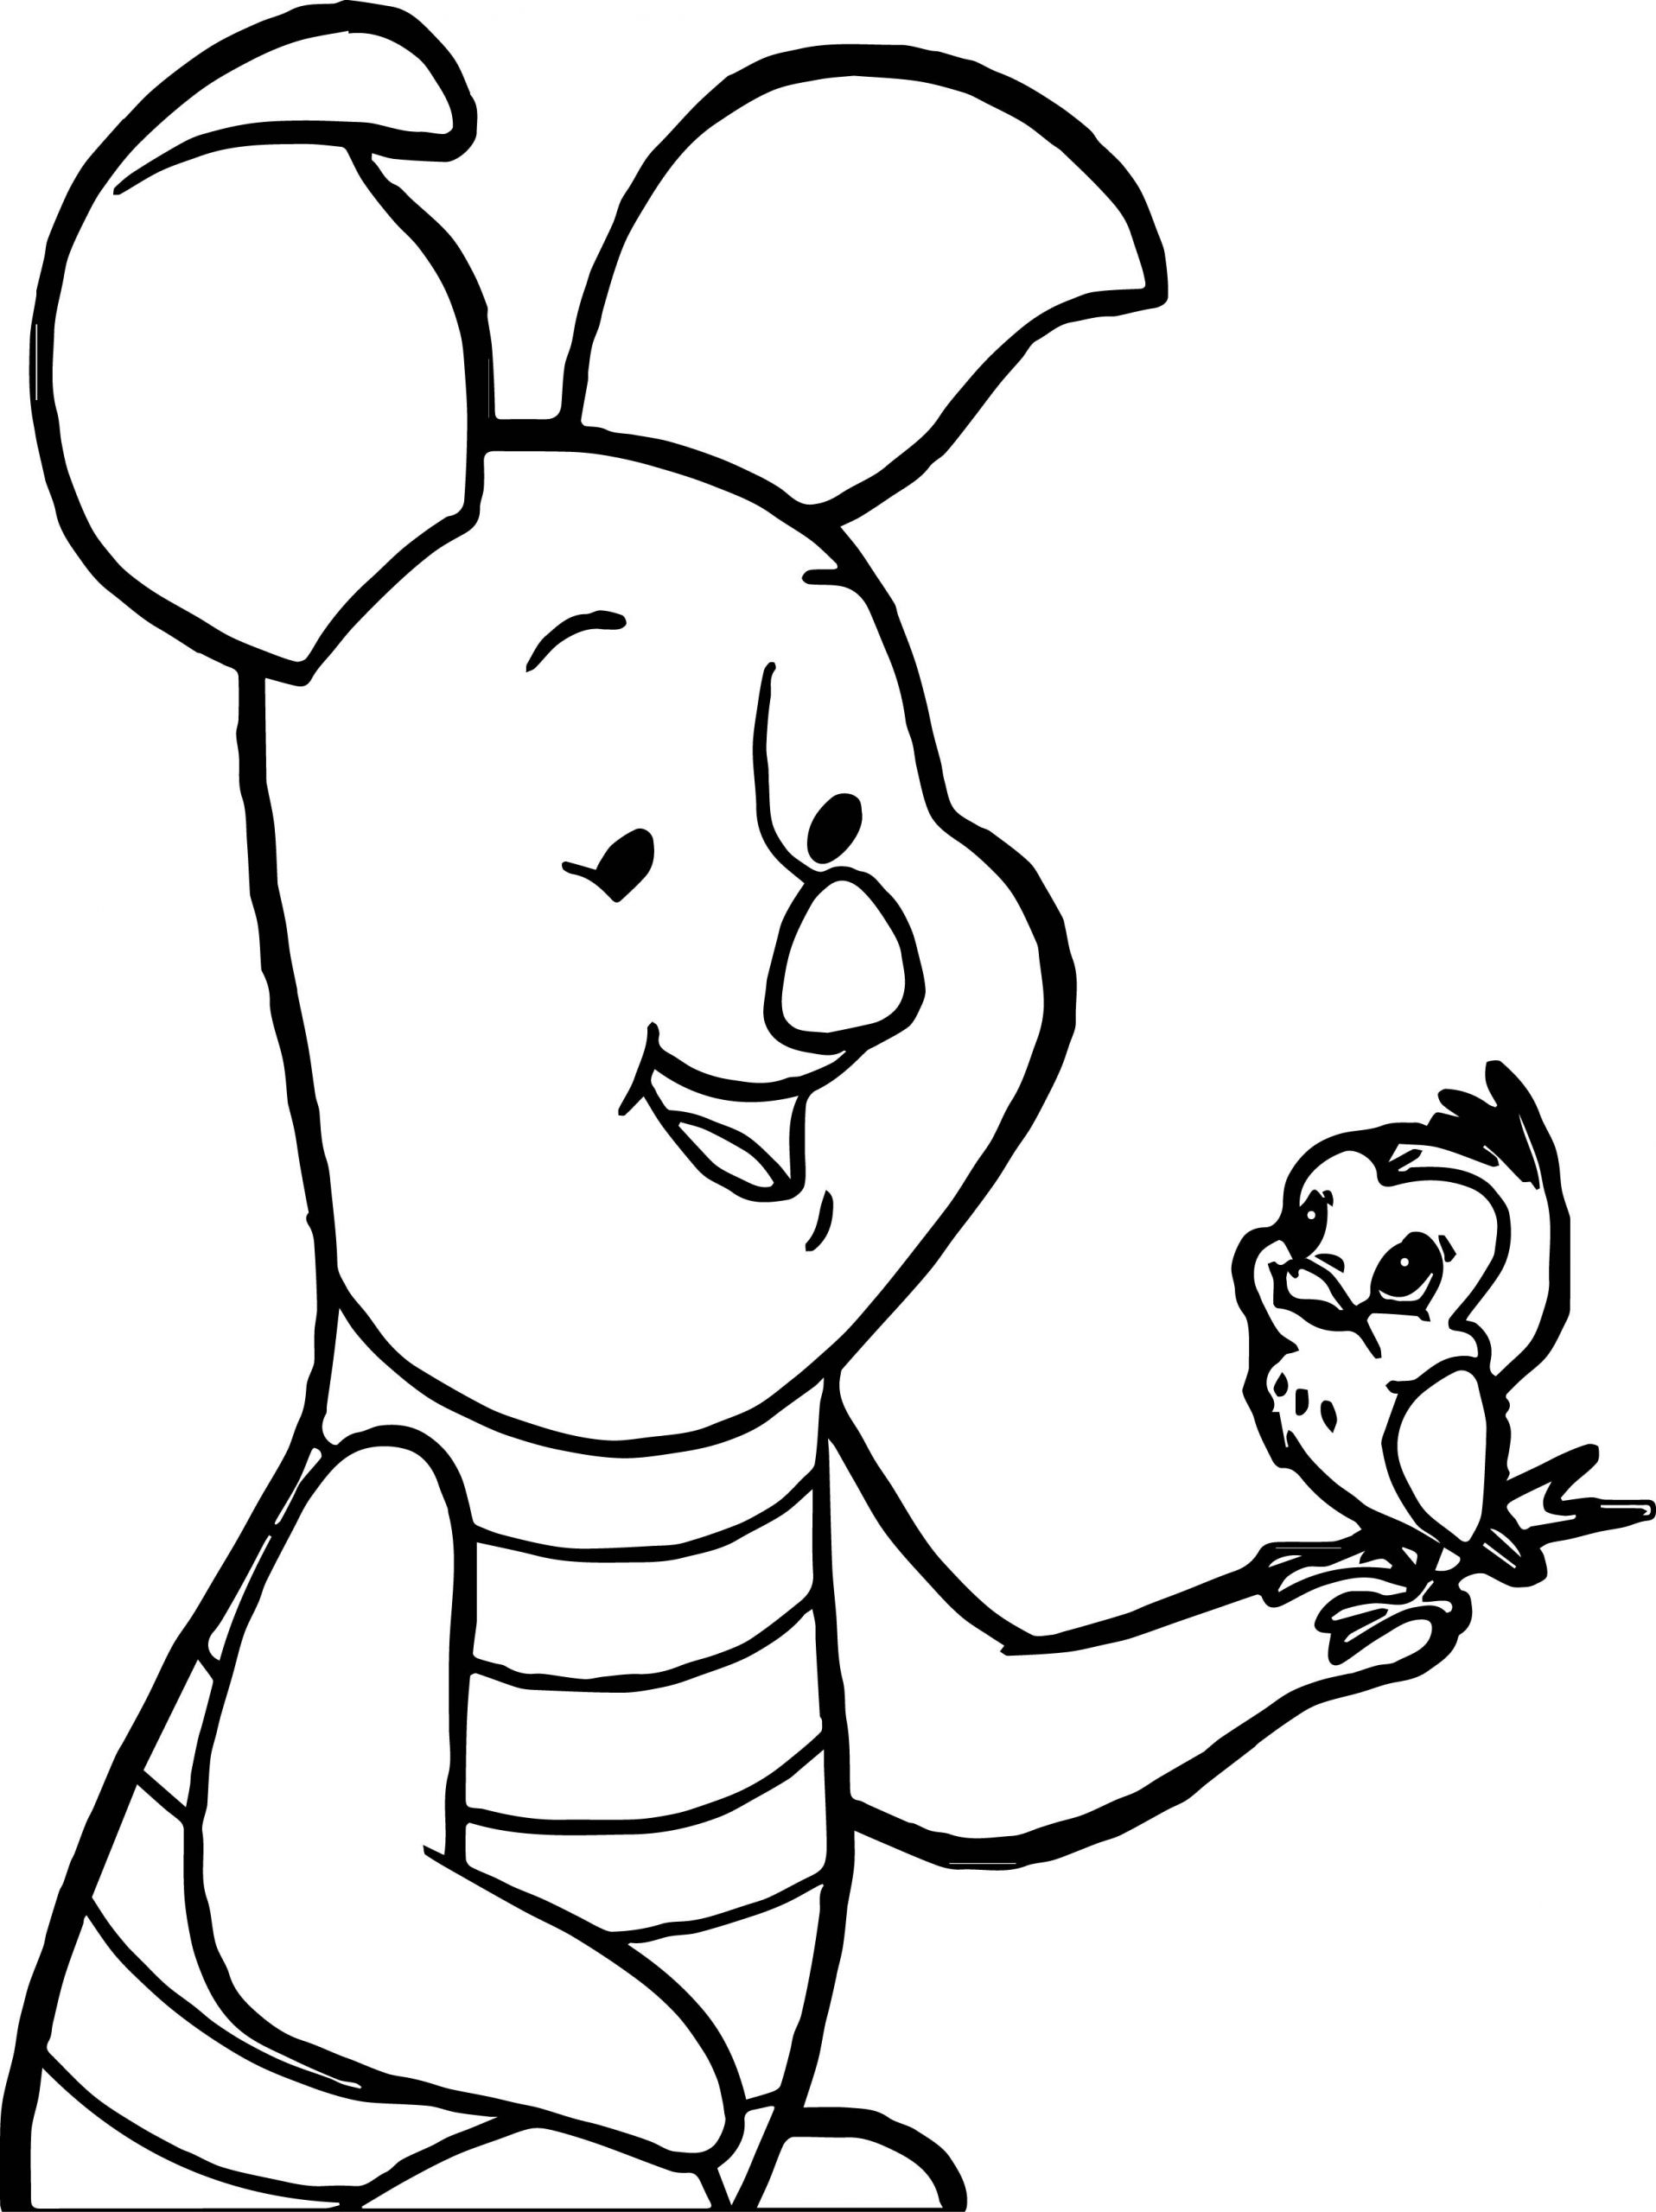 Baby Bird Coloring Page
 Baby Piglet And Bird Coloring Page